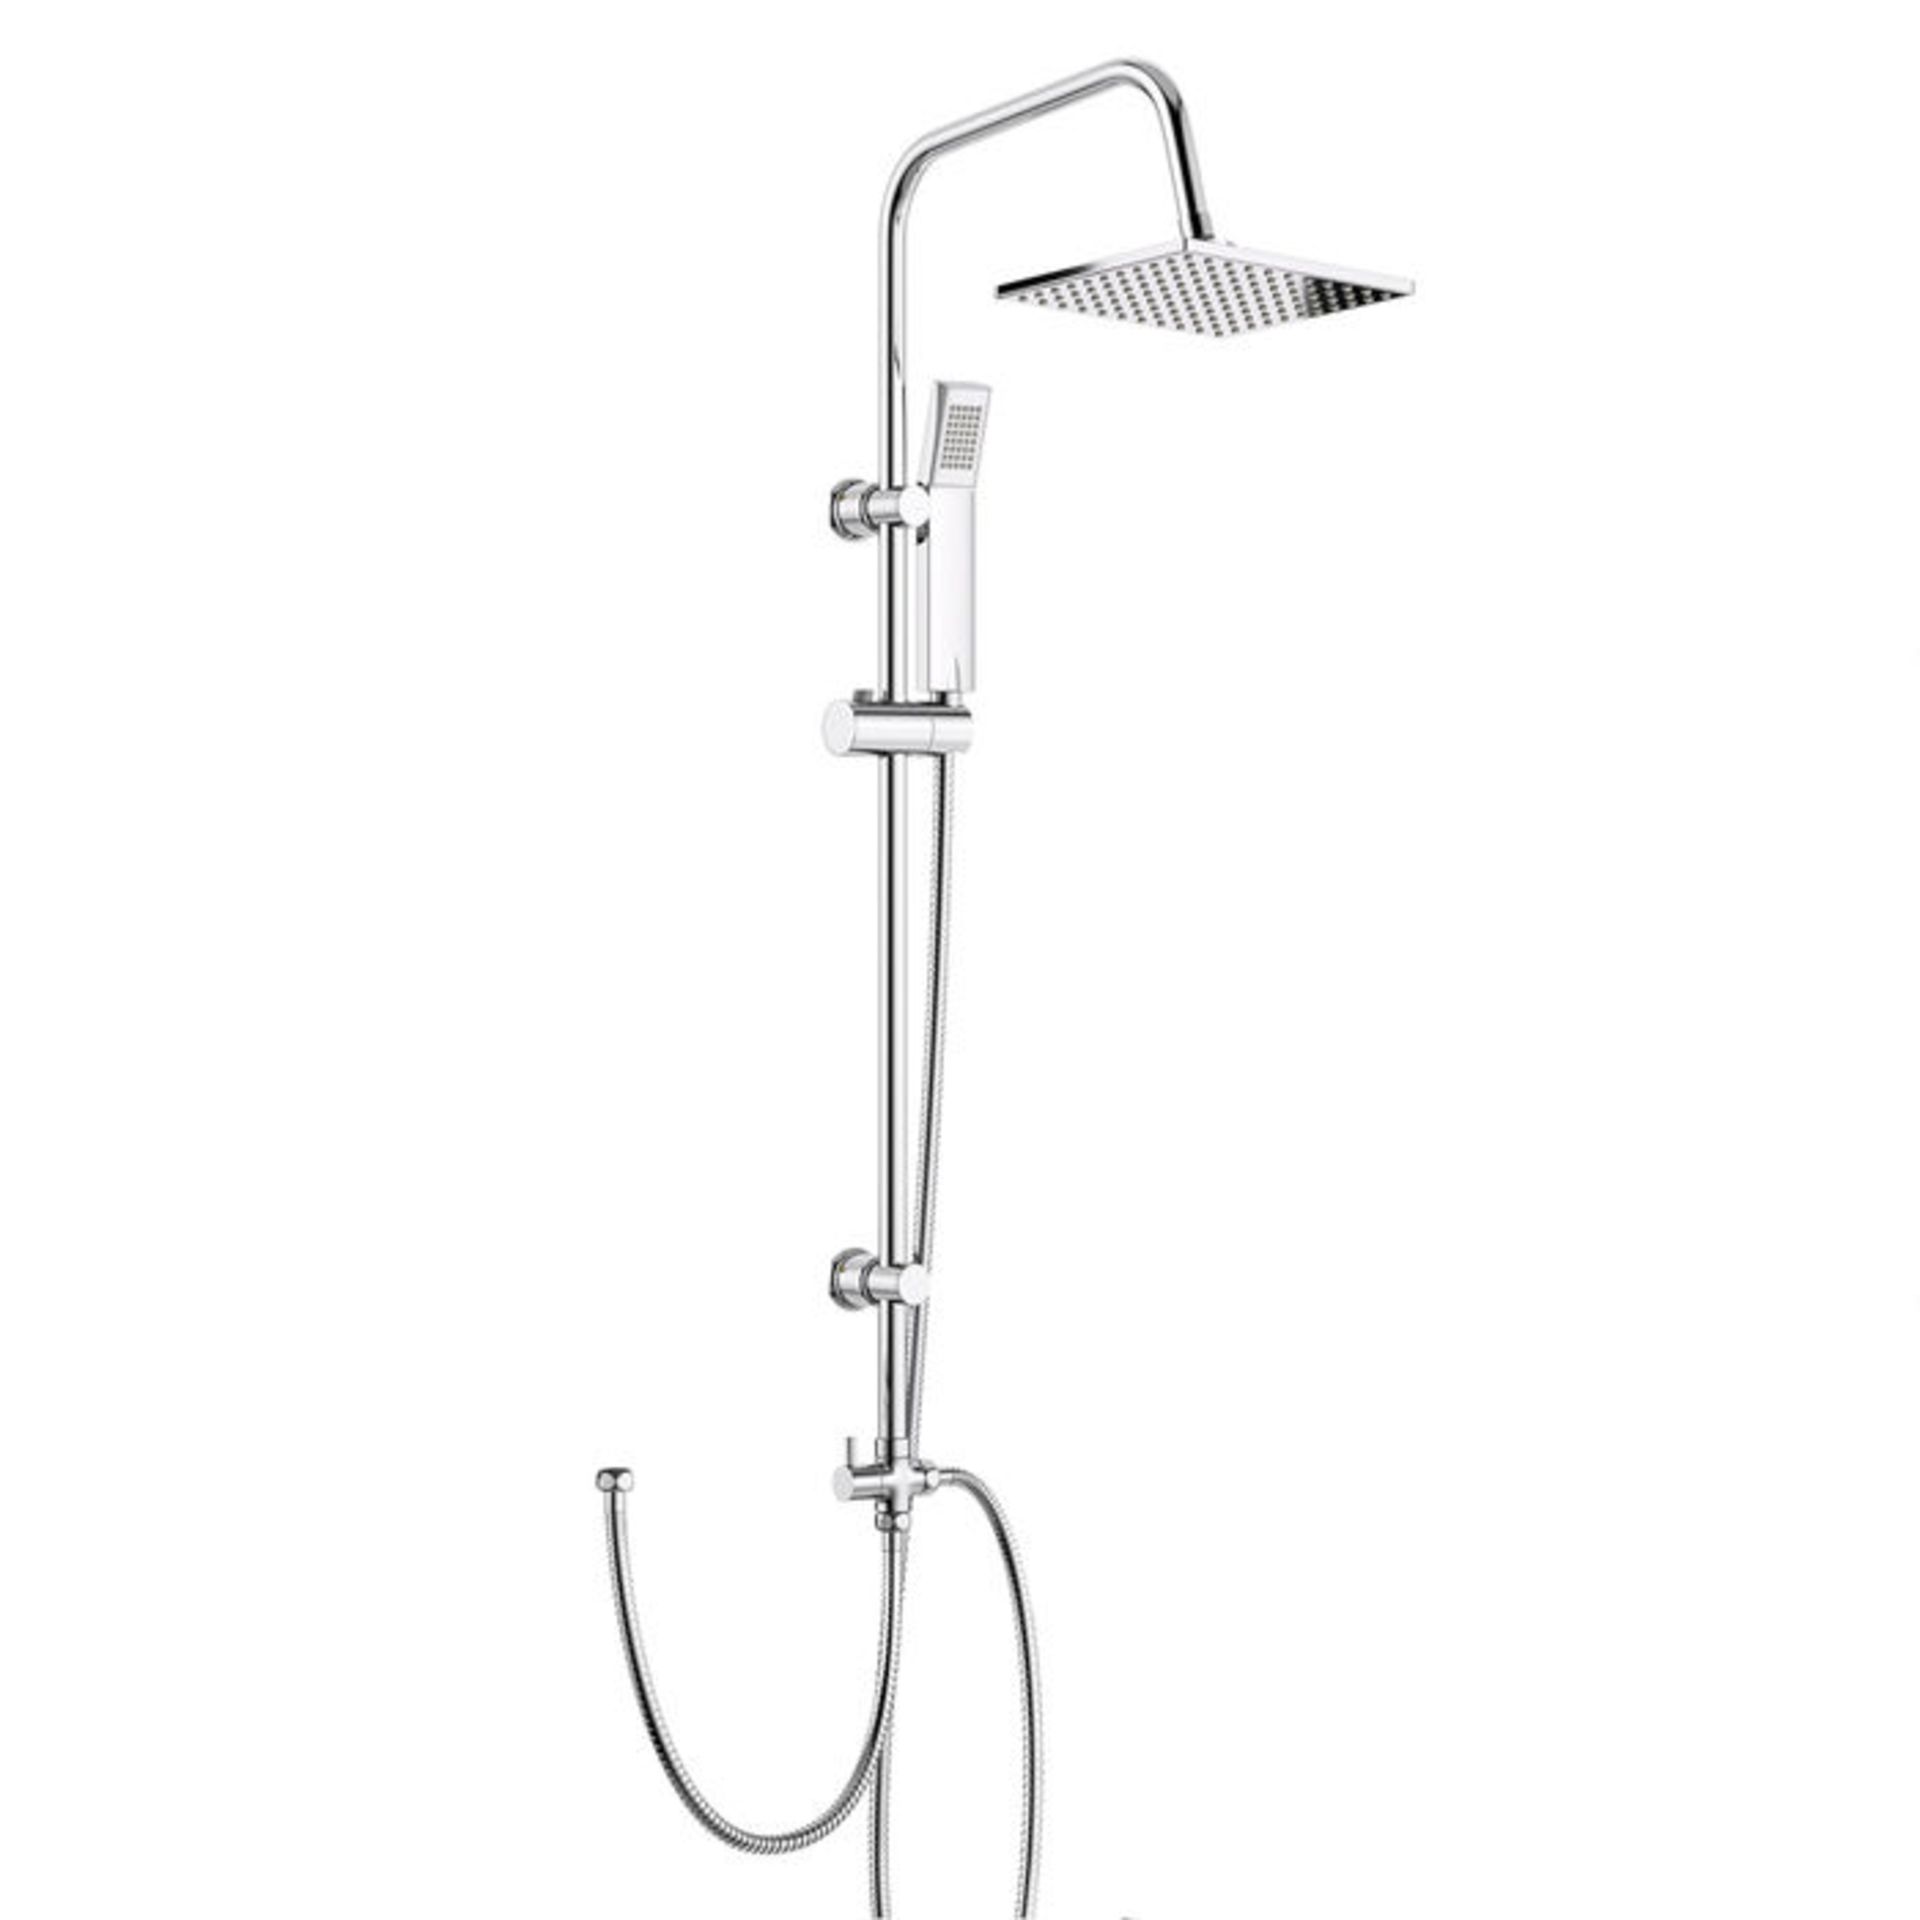 (TS213) 200mm Square Head, Riser Rail Handheld Kit. Quality stainless steel shower head with Easy - Image 2 of 3